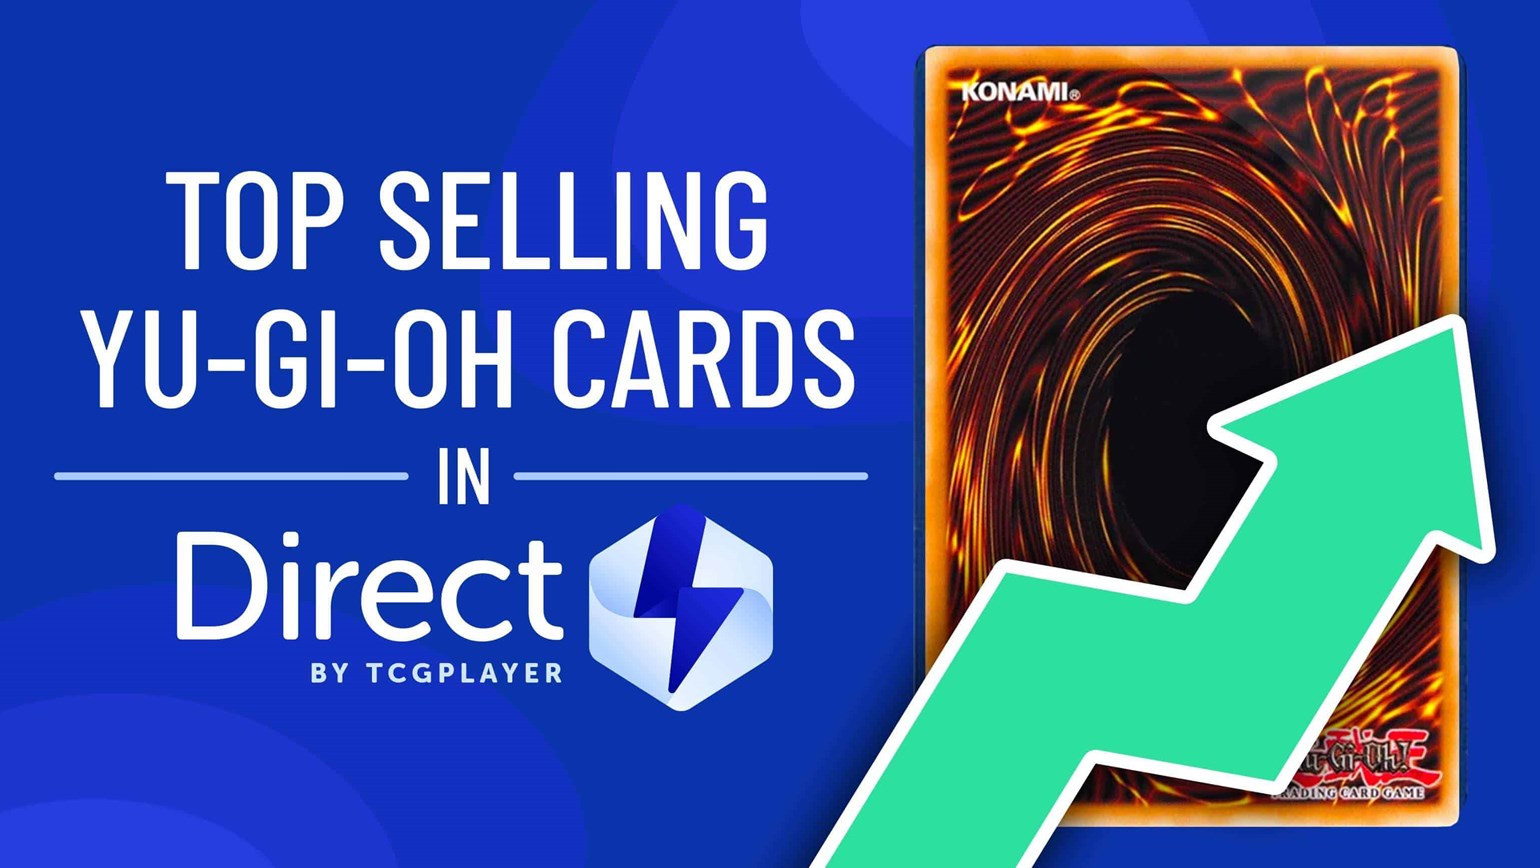 September Top Selling Yu-Gi-Oh! Cards Under $25 in Direct by TCGplayer